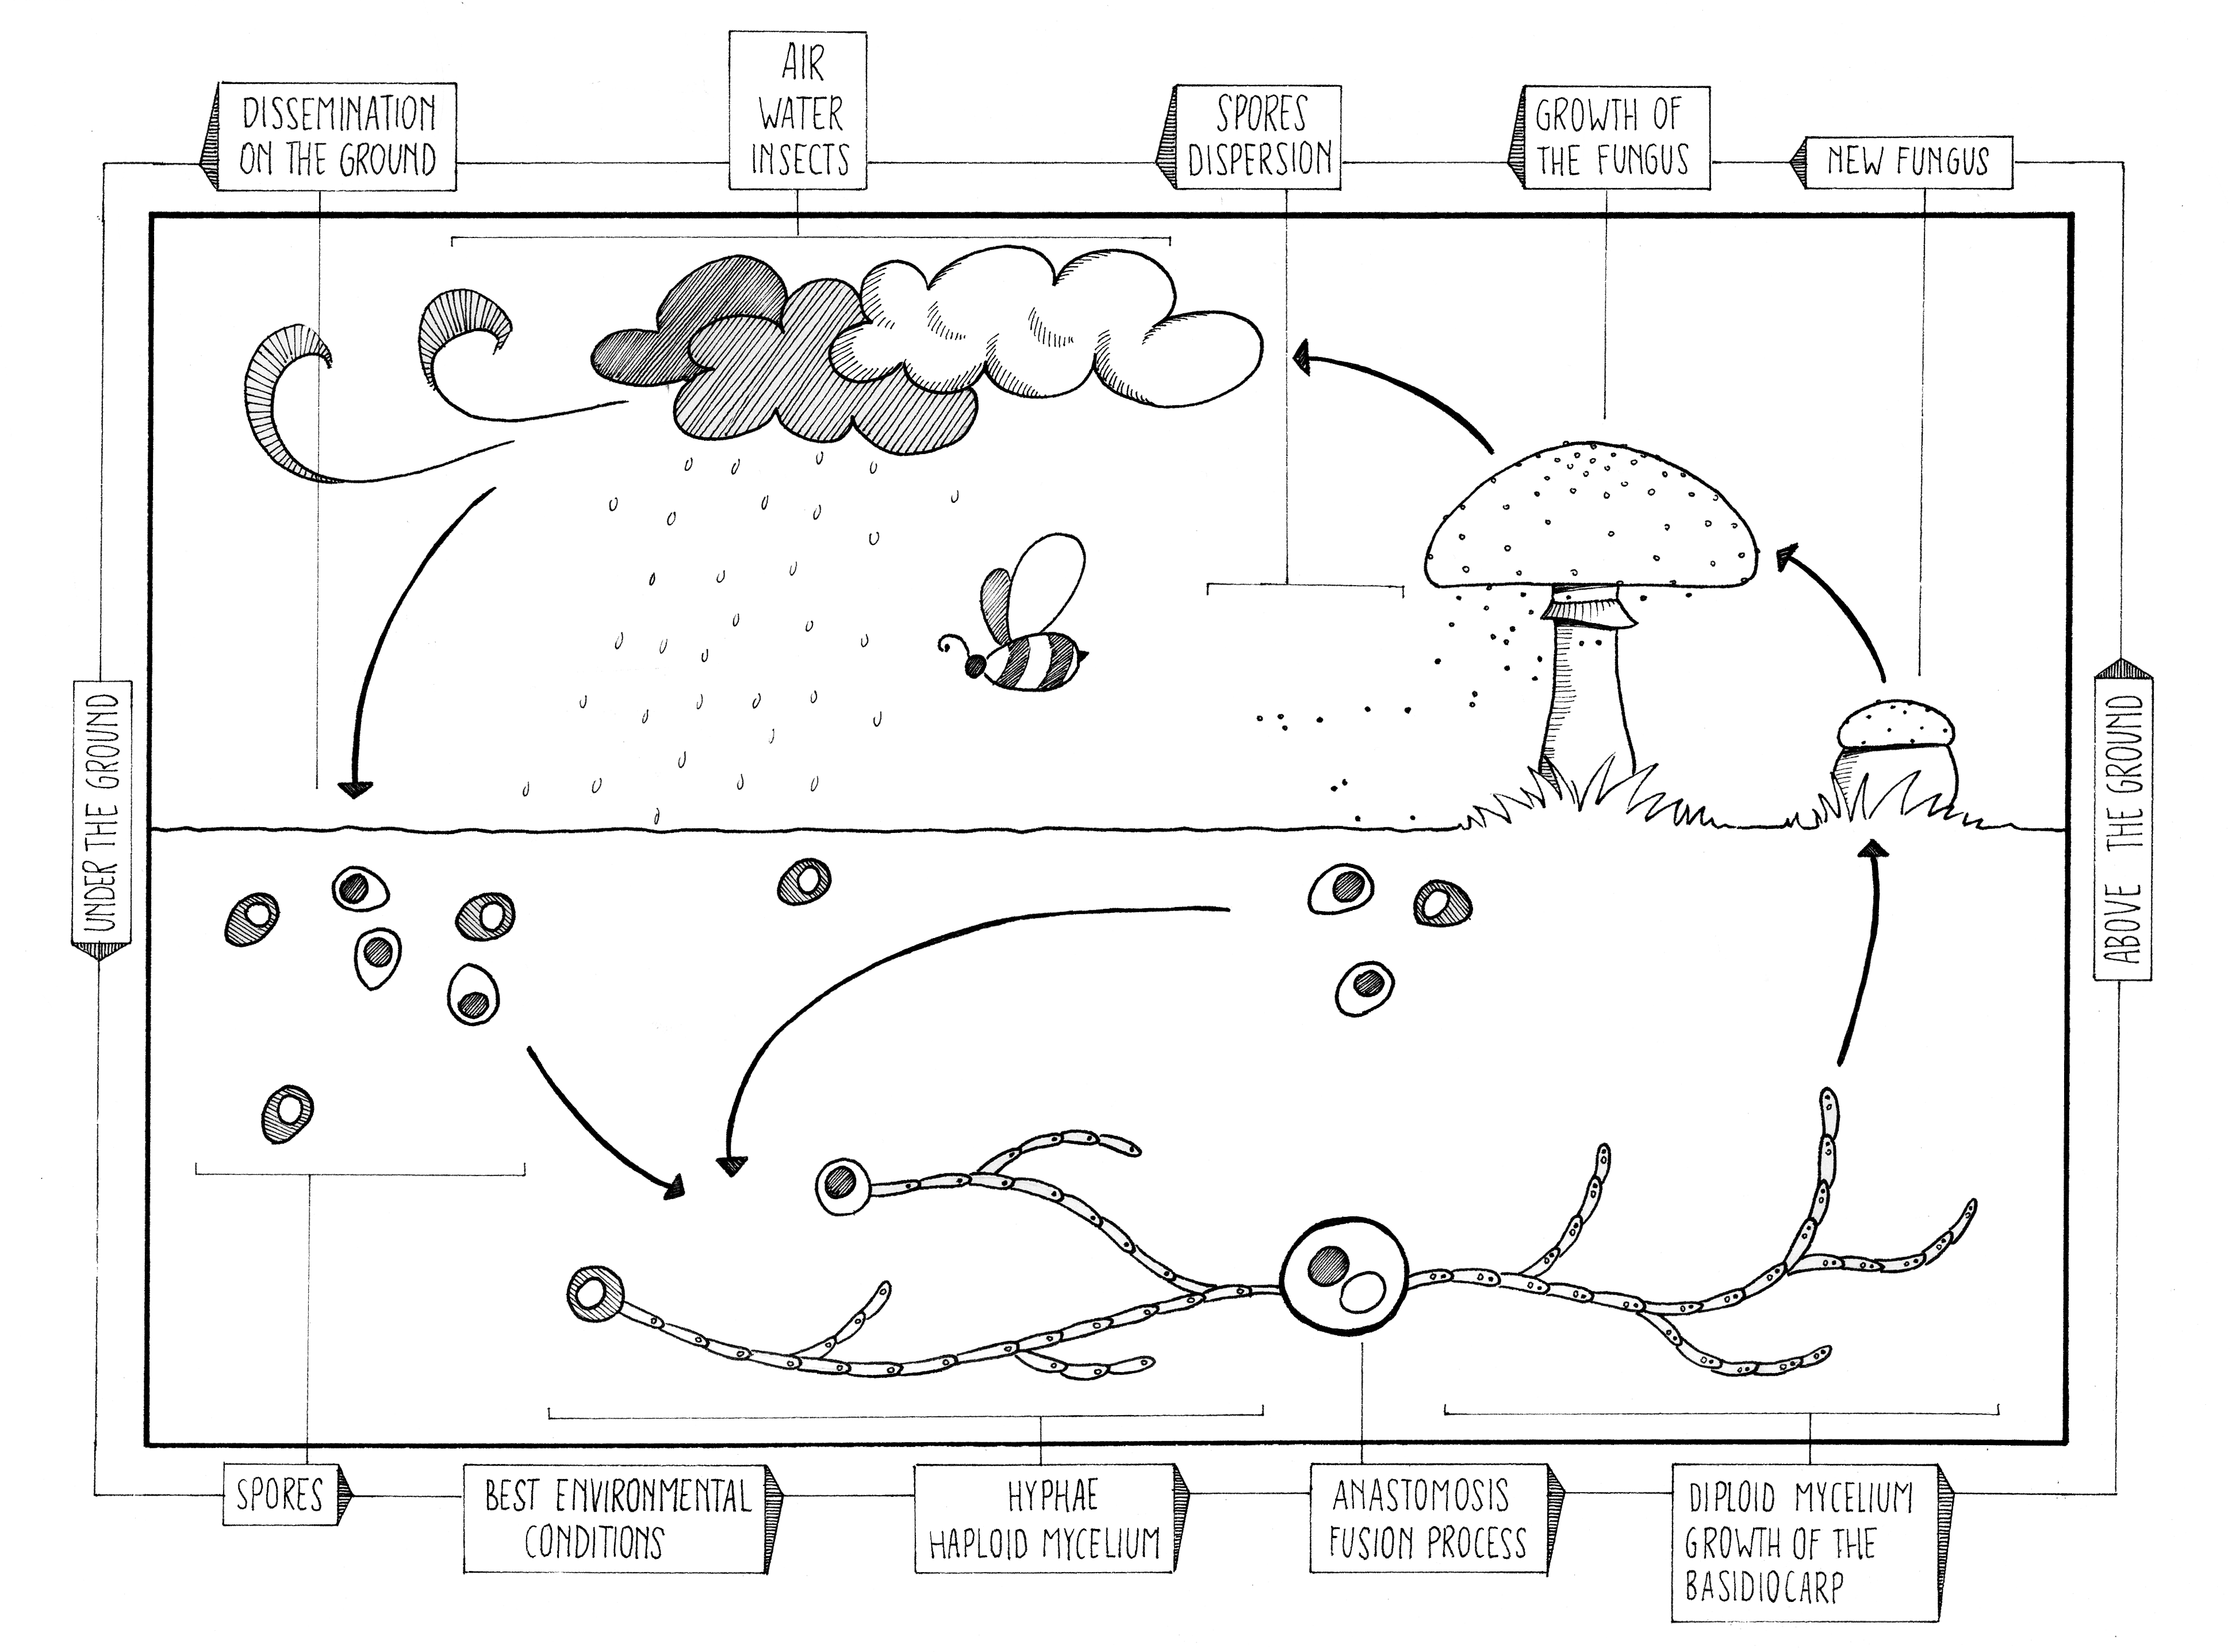 graphic of life cycle of fungi spores